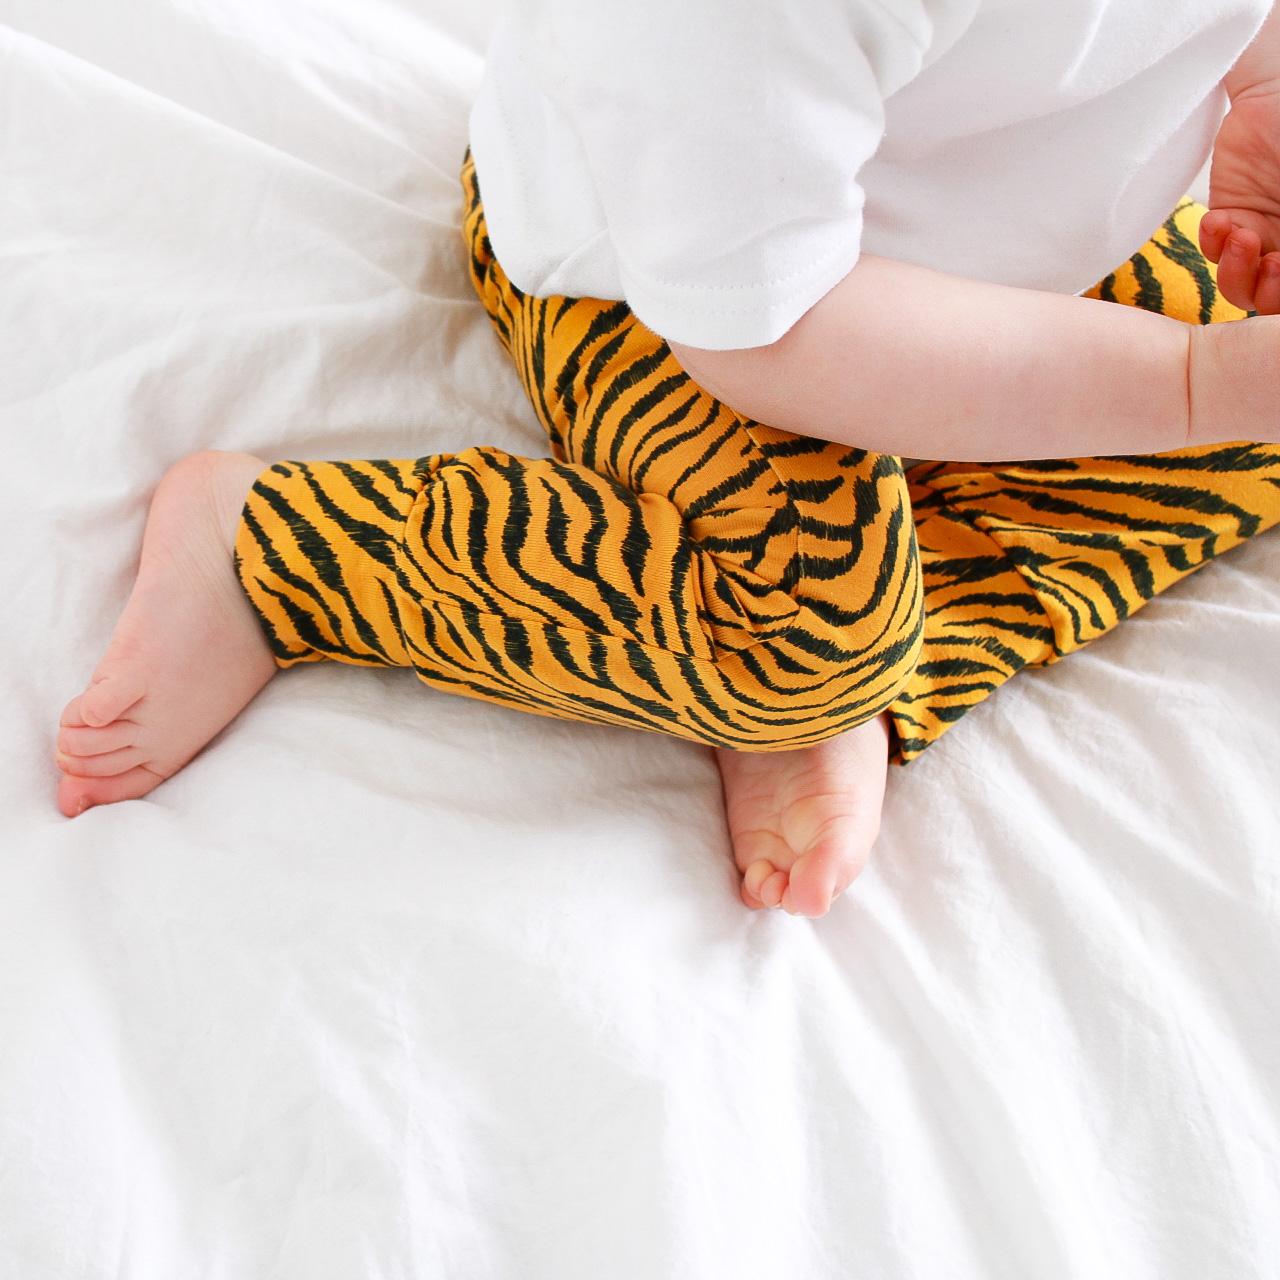 Load image into Gallery viewer, Tiger Print Leggings
